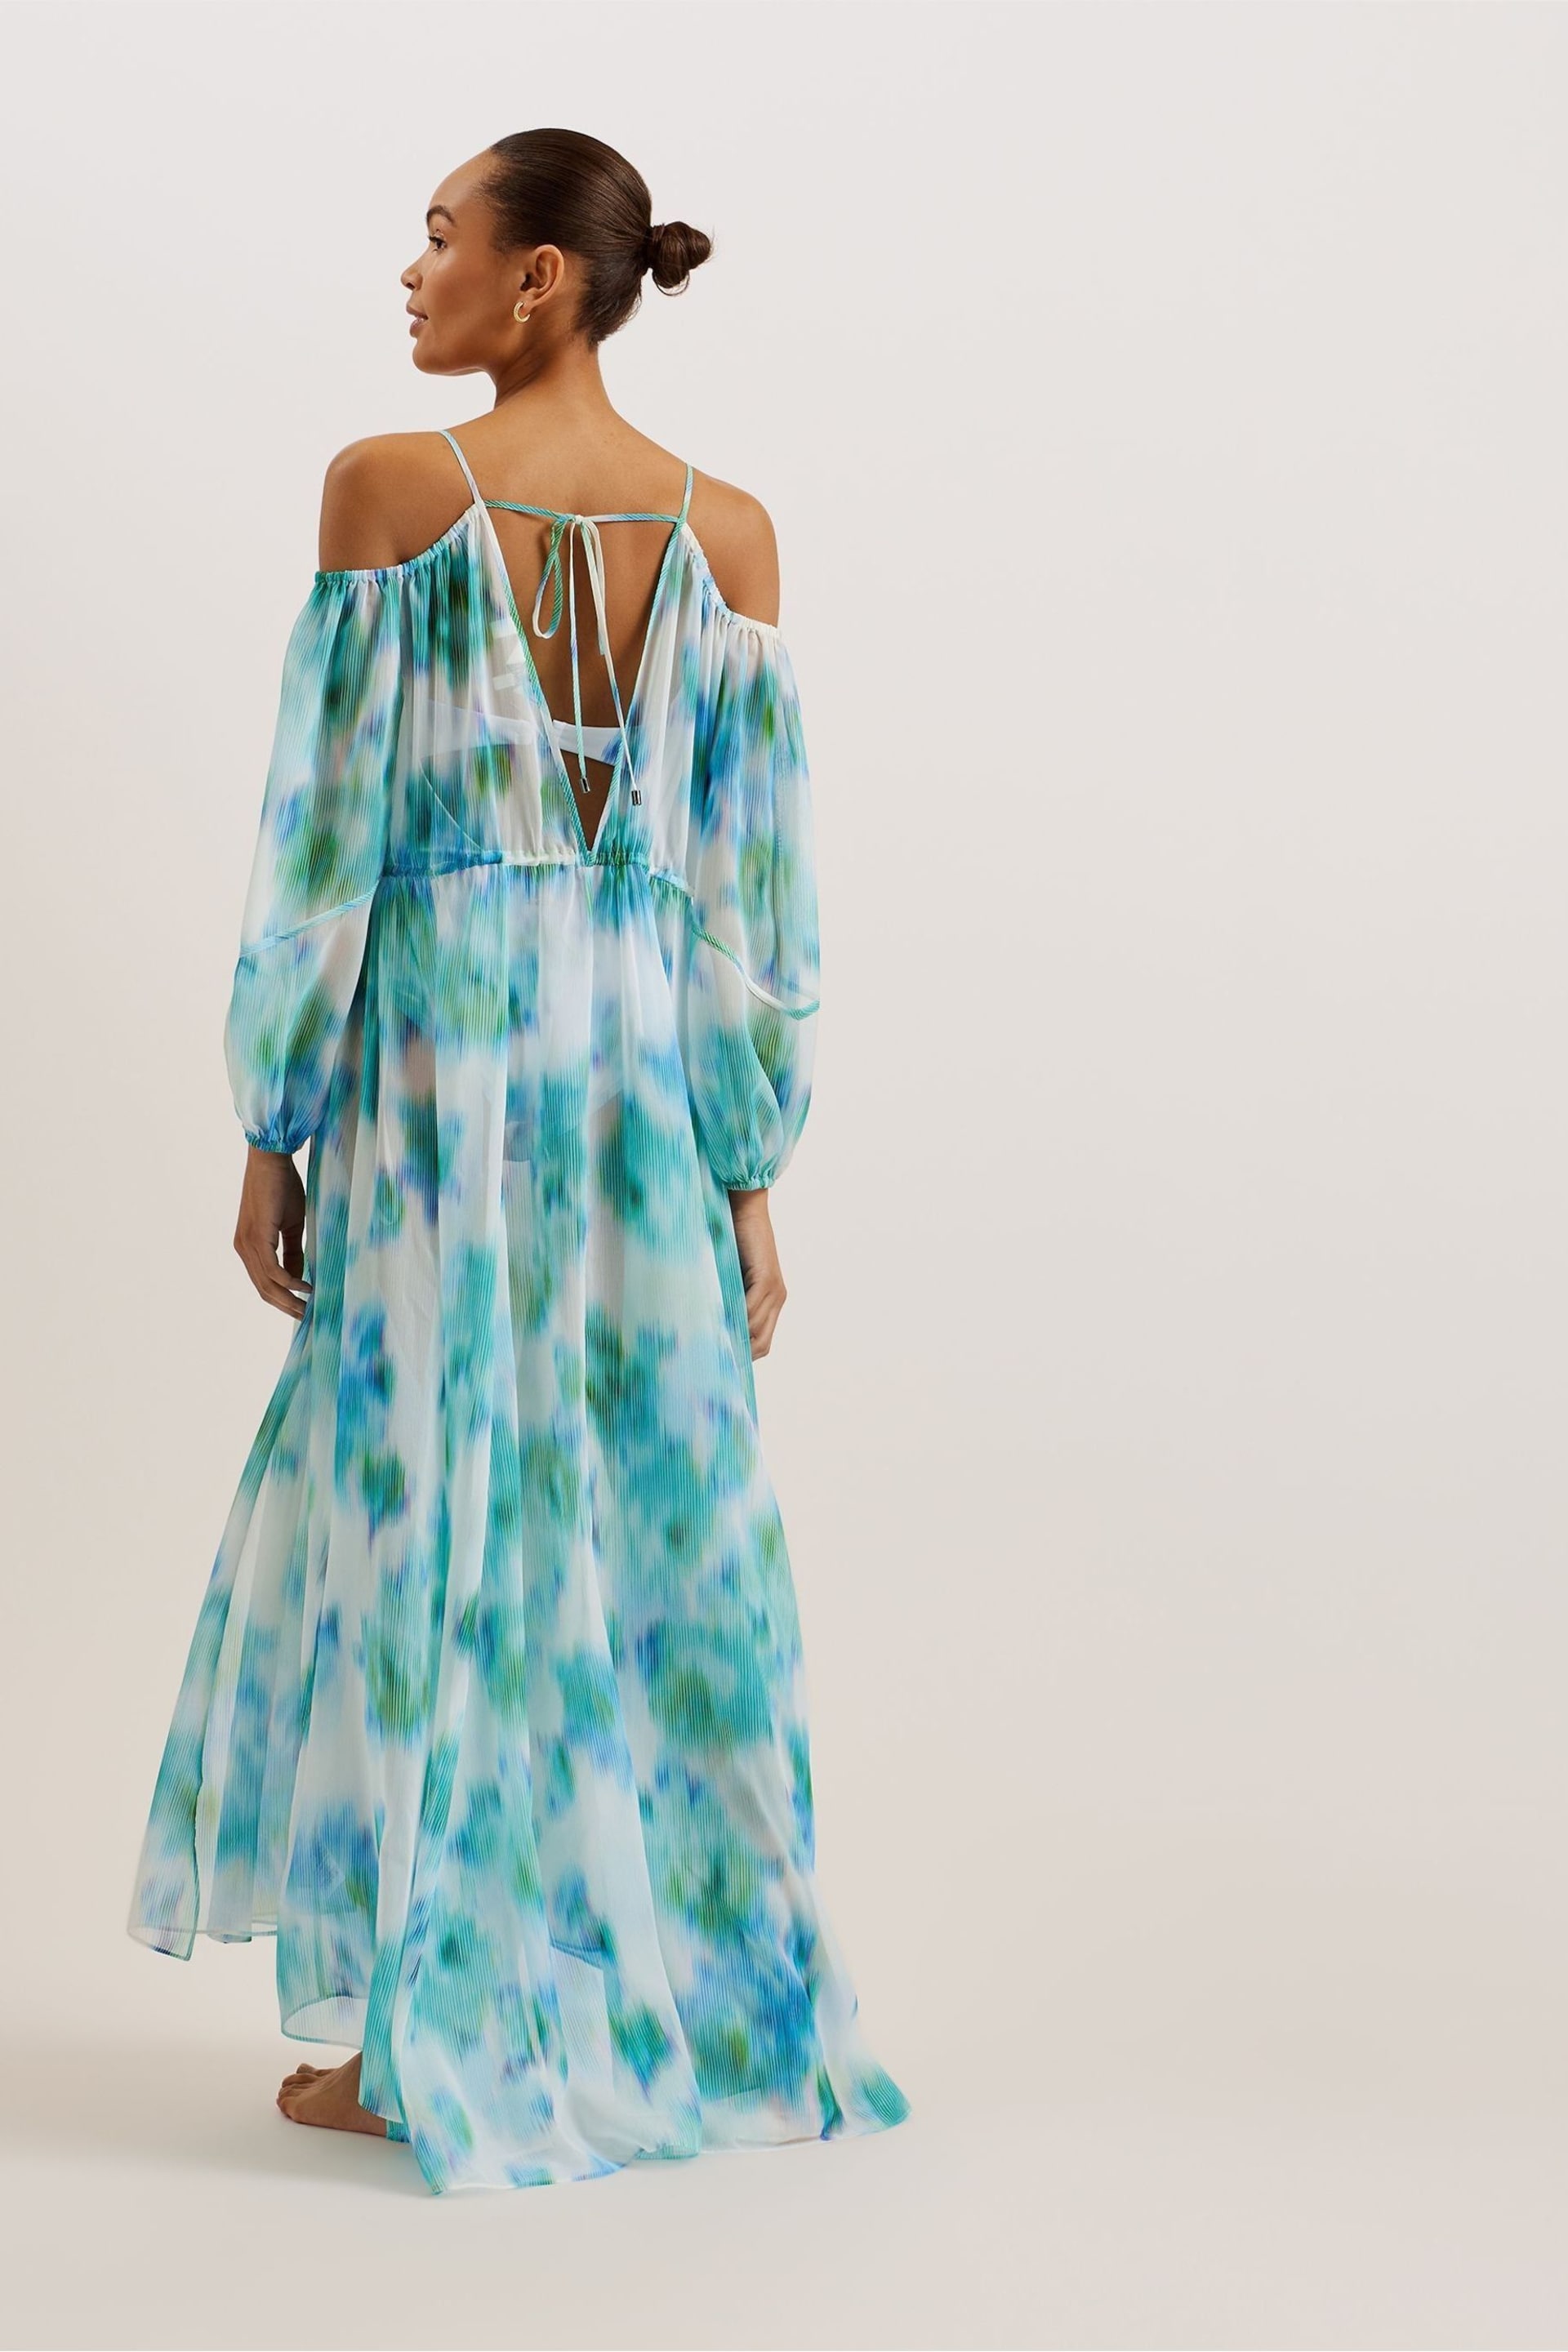 Ted Baker Multi Meriann Maxi Cover-Up With Cold Shoulder - Image 4 of 5